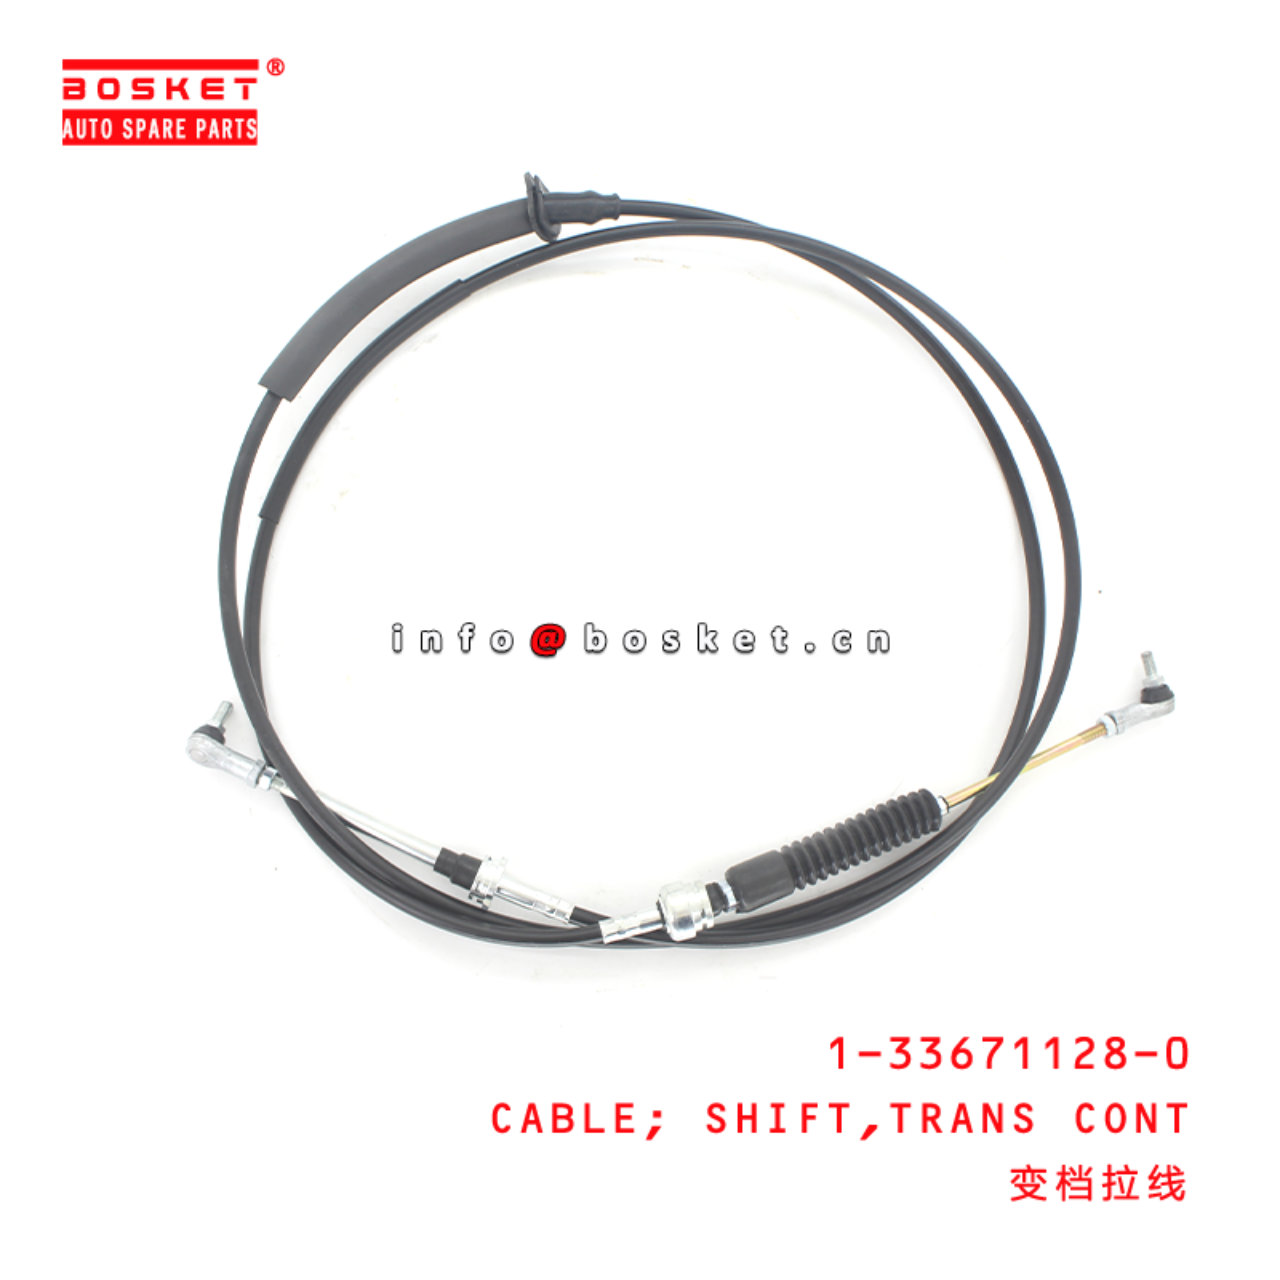 1-33671128-0 Transmission Control Shift Cable Suitable for ISUZU FTR 1336711280